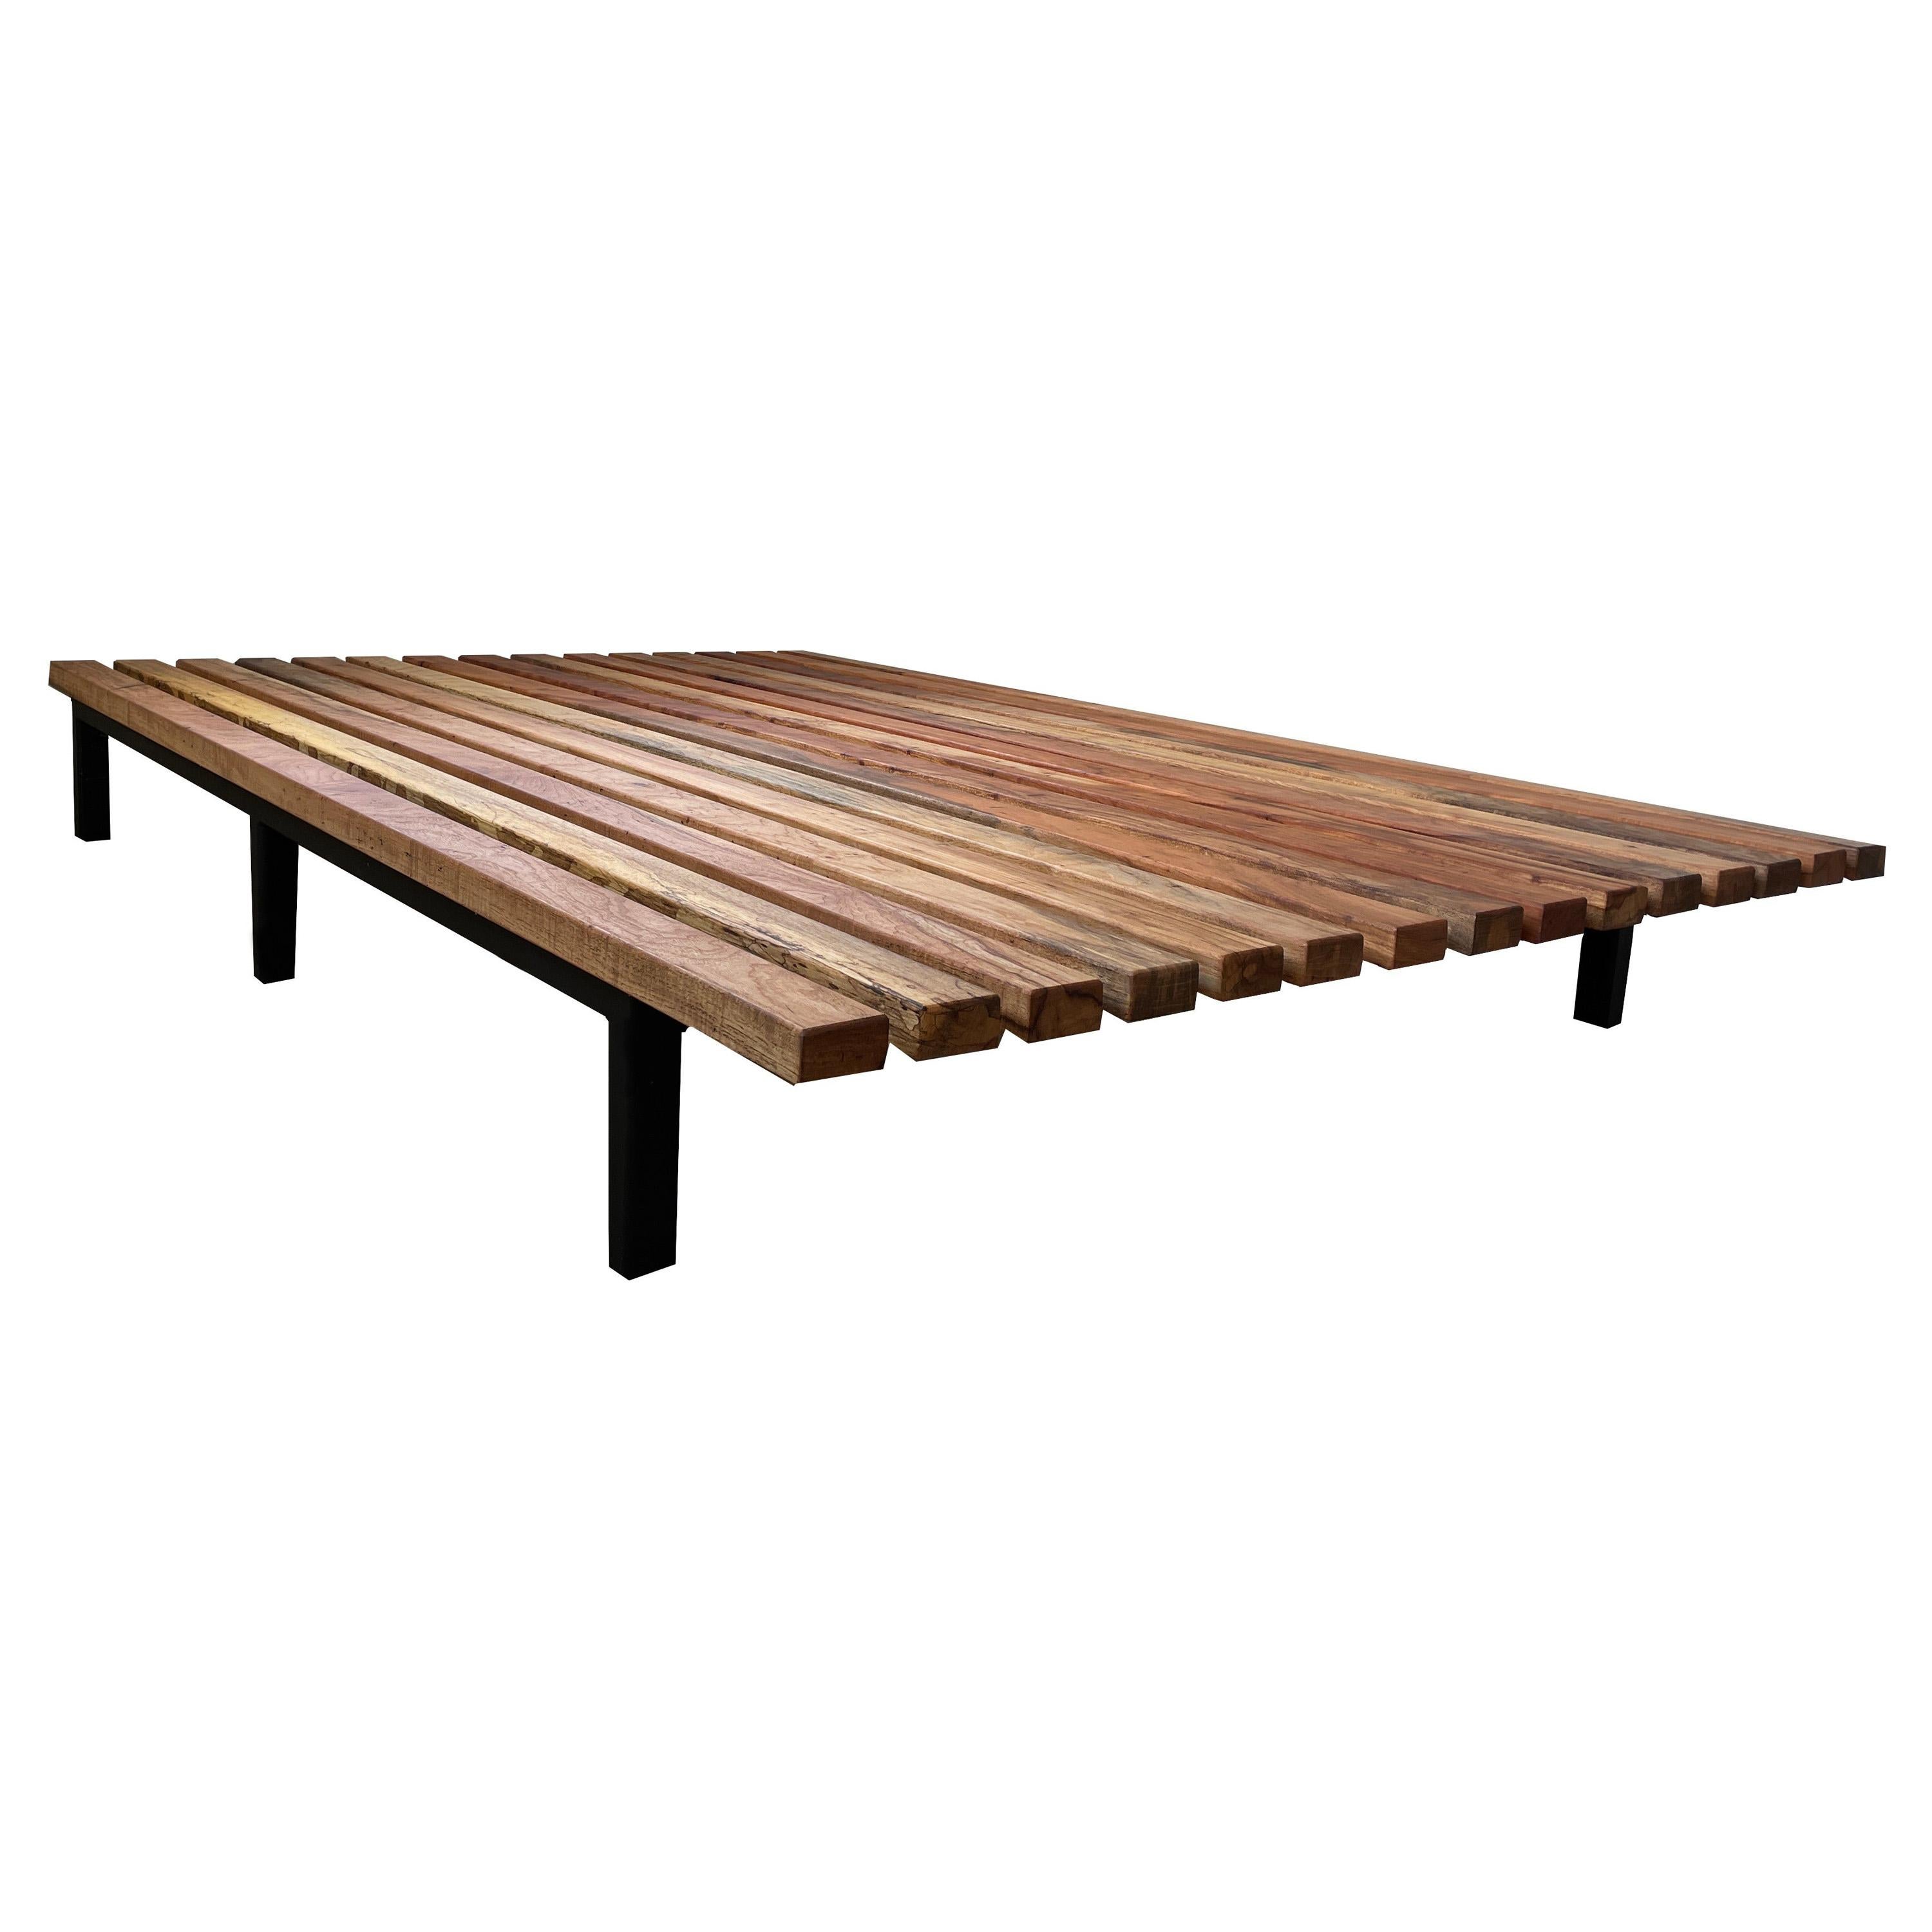 Humphreys Full-Size Slat Bed, American Pecan Wood For Sale